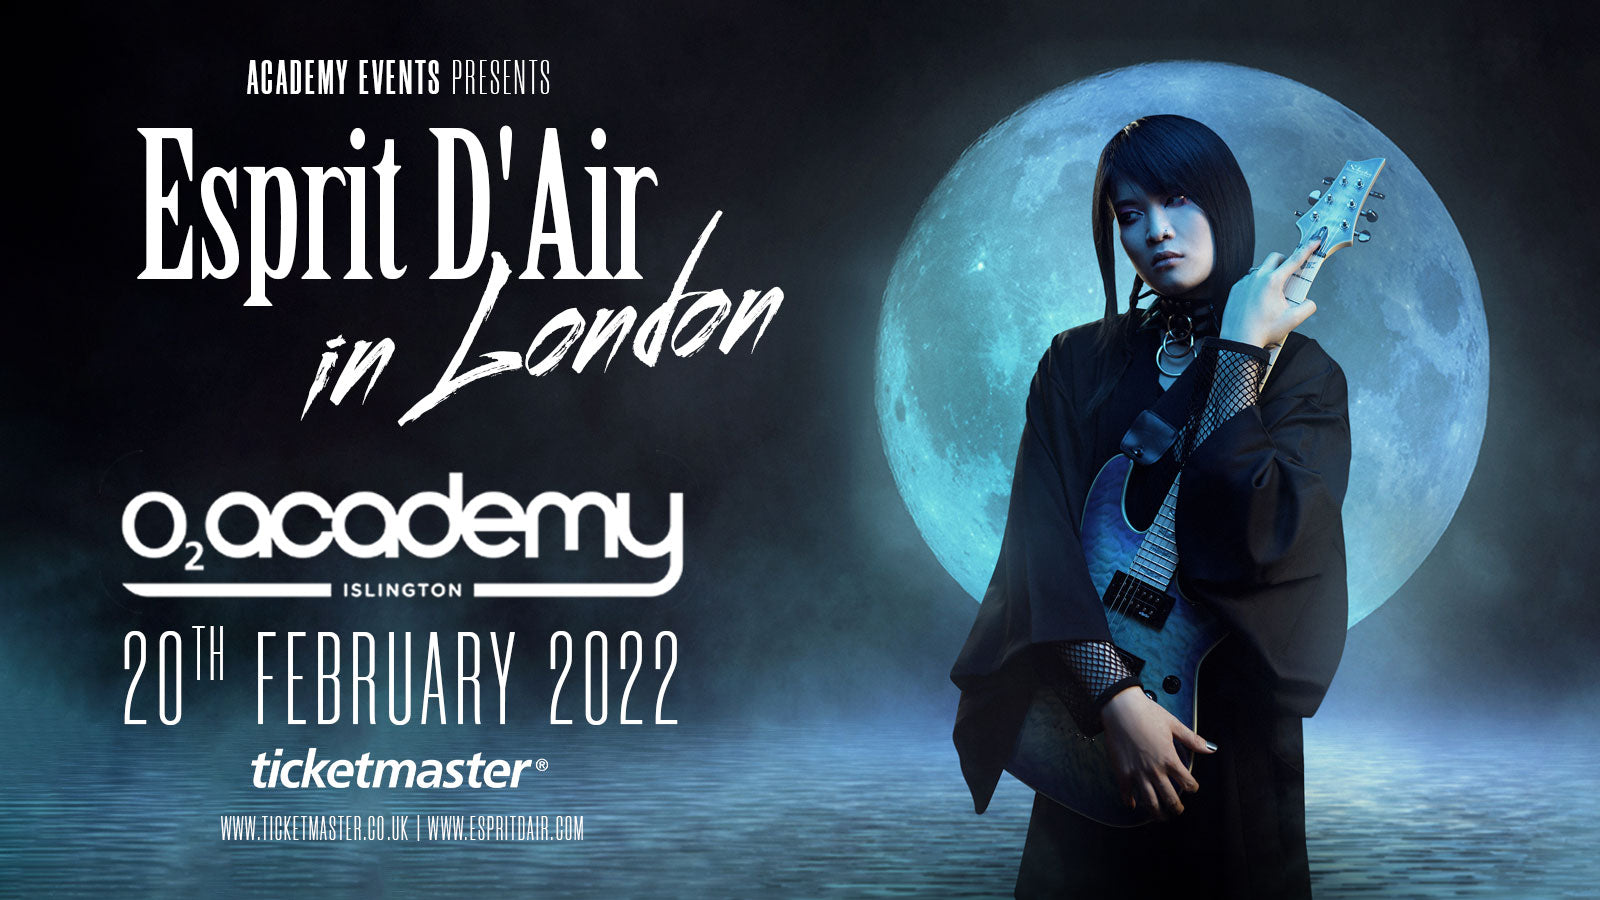 Esprit D'Air to perform at O2 Academy Islington in February 2022